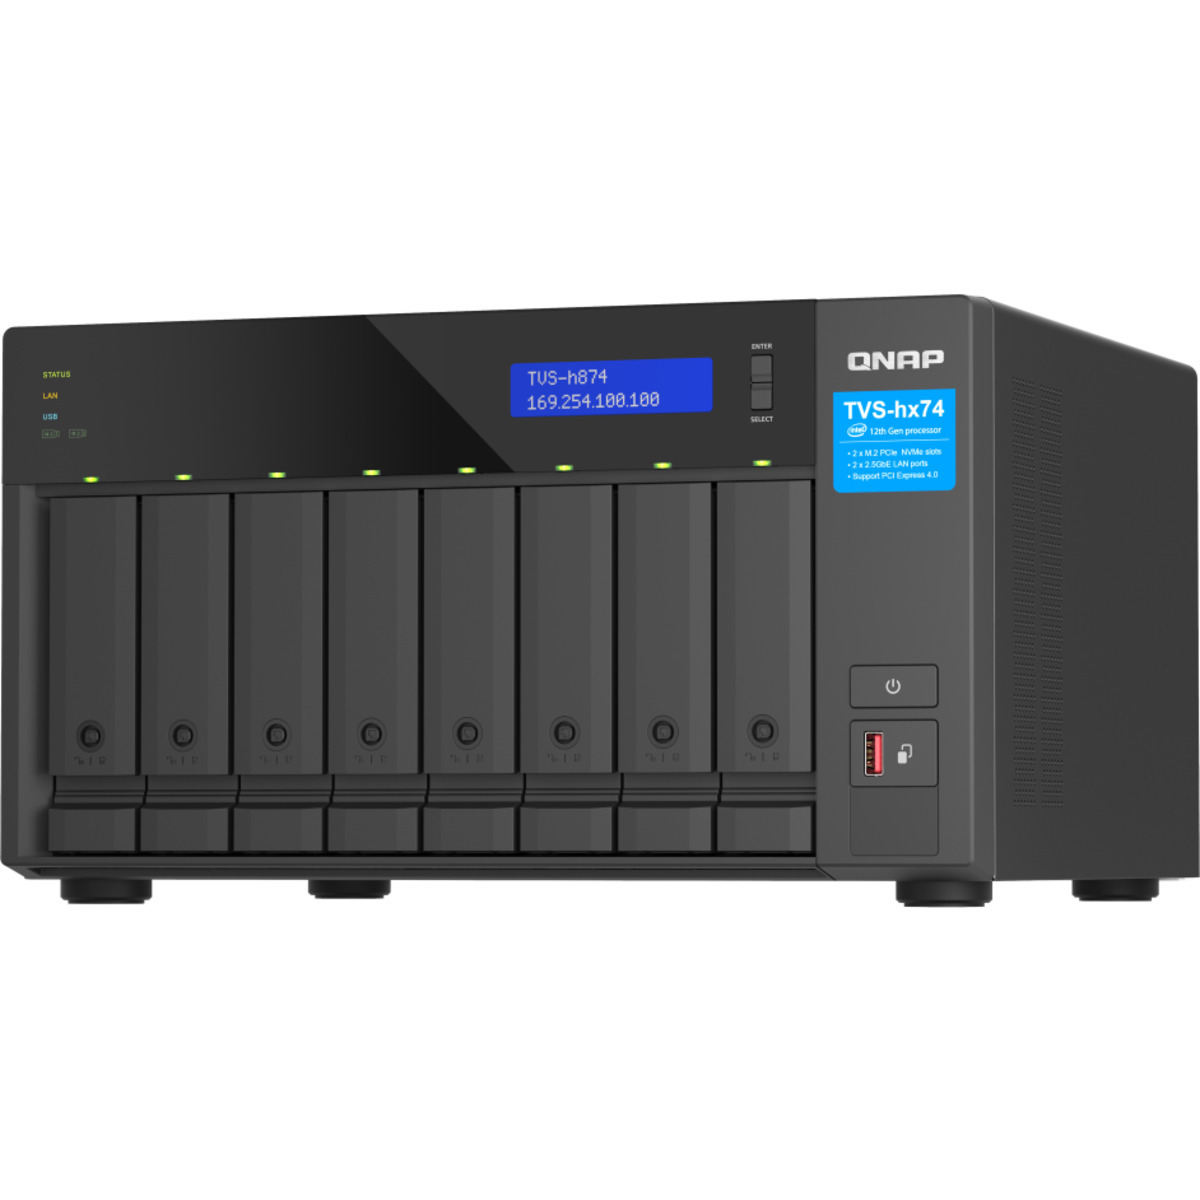 QNAP TVS-h874 Core i5 64tb 8-Bay Desktop Multimedia / Power User / Business NAS - Network Attached Storage Device 8x8tb Western Digital Gold WD8004FRYZ 3.5 7200rpm SATA 6Gb/s HDD ENTERPRISE Class Drives Installed - Burn-In Tested TVS-h874 Core i5